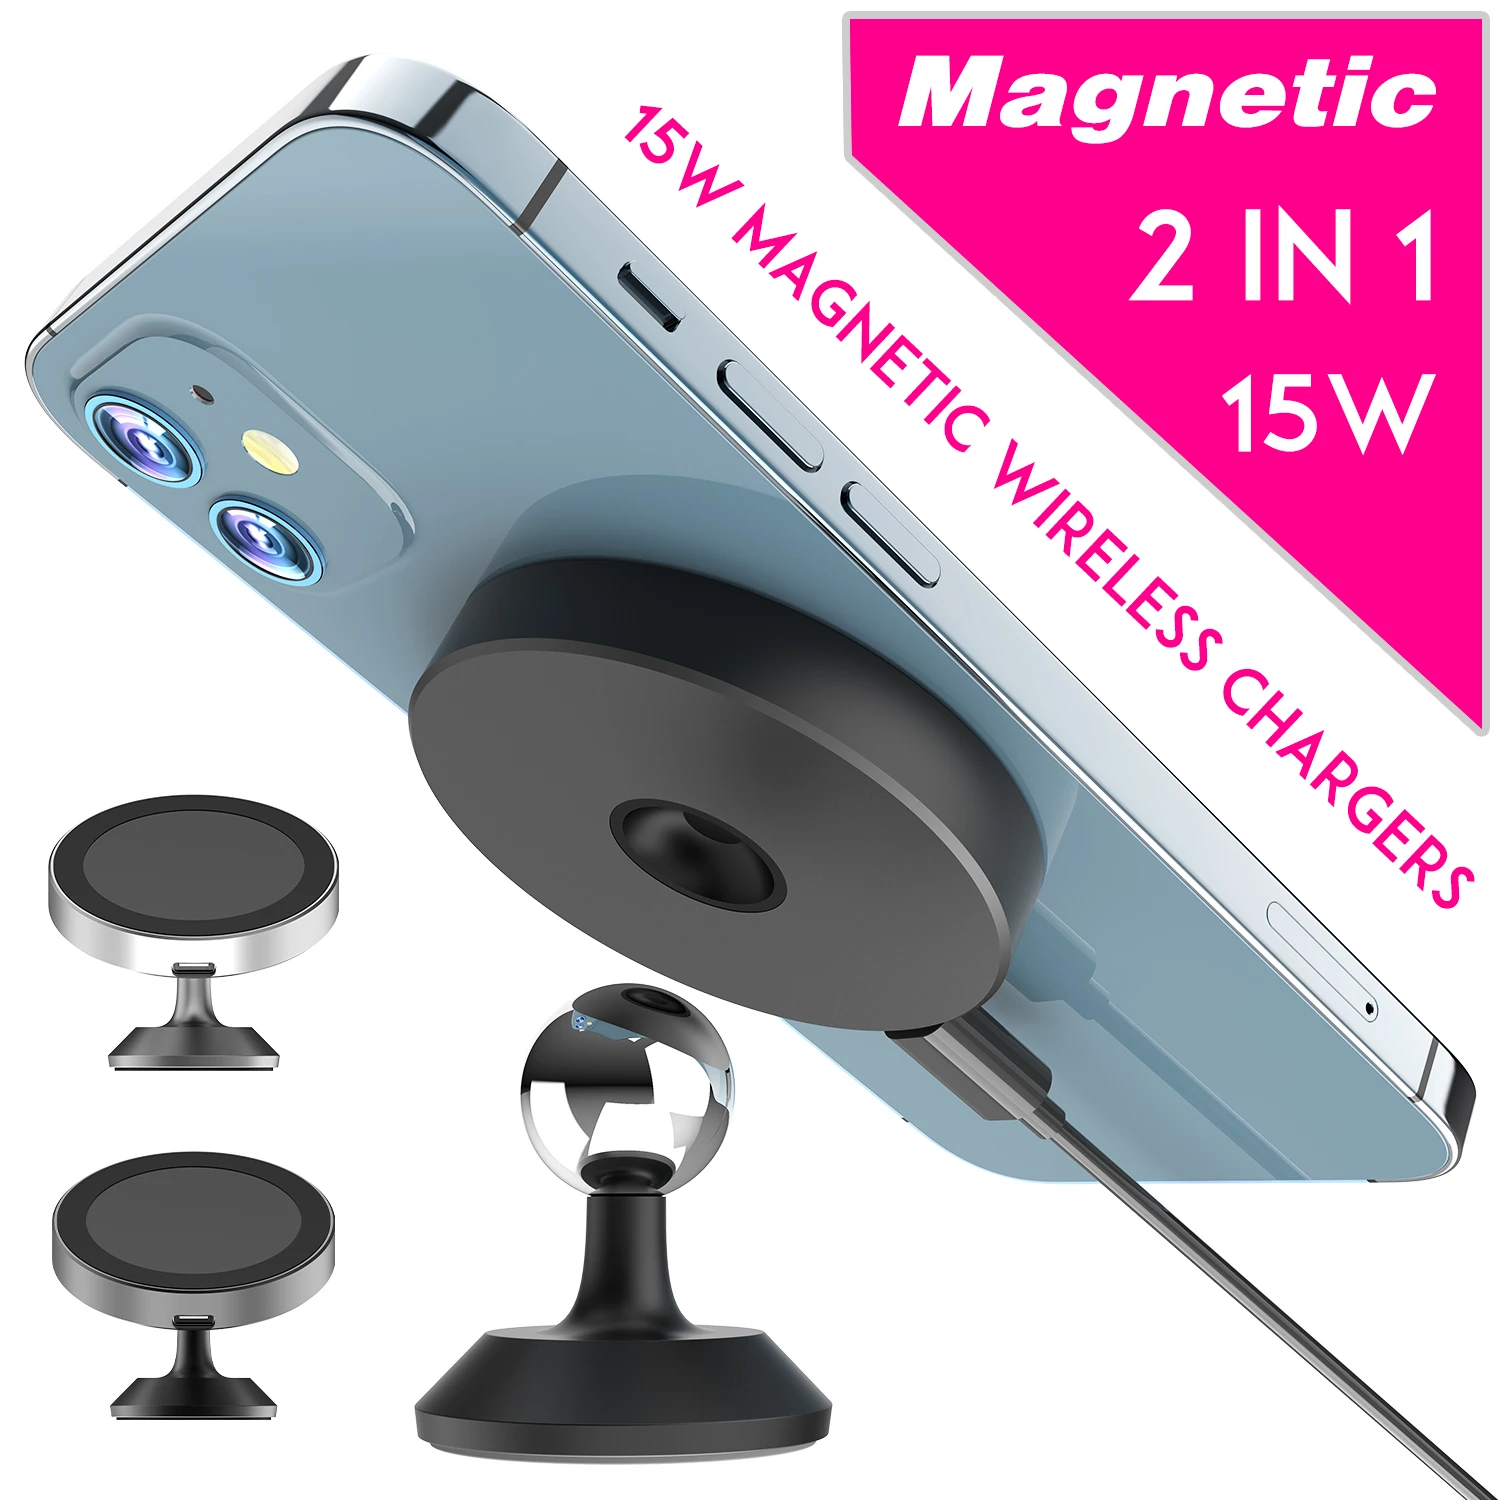 Magnetic Wireless Charger 2in1 15W Qi Wireless Car Charger For mag iPhone 12 13 Pro Max Mini Samsung Huawei Xiaomi apple magsafe charger